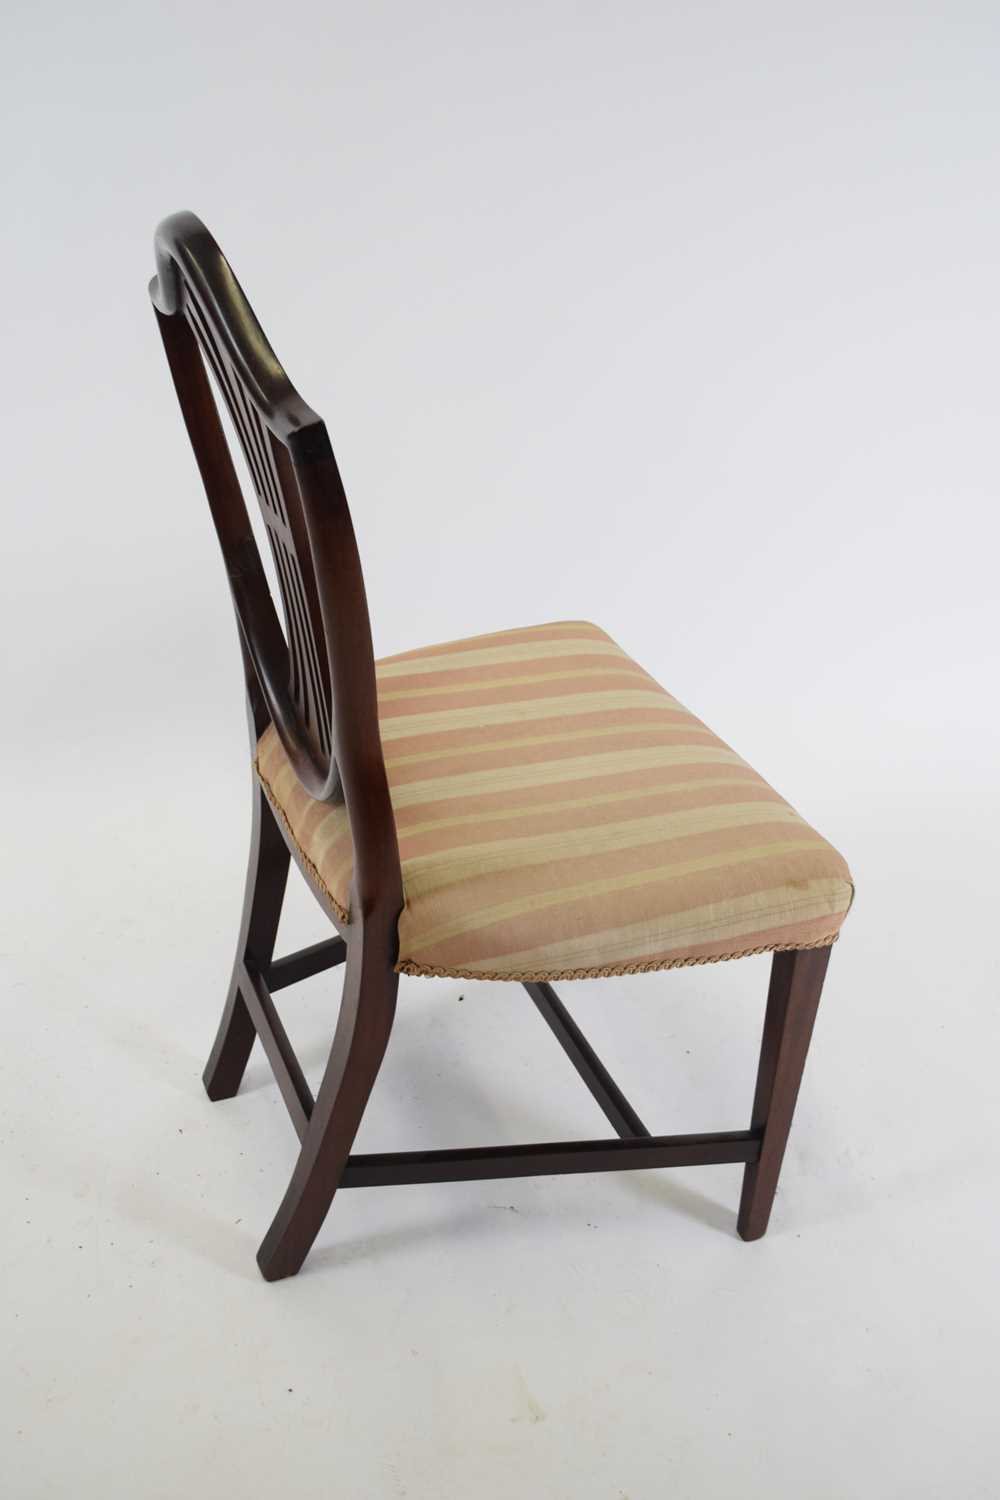 Mahogany framed shield back dining chair decorated with wheatsheaf detail and upholstered in striped - Image 2 of 4